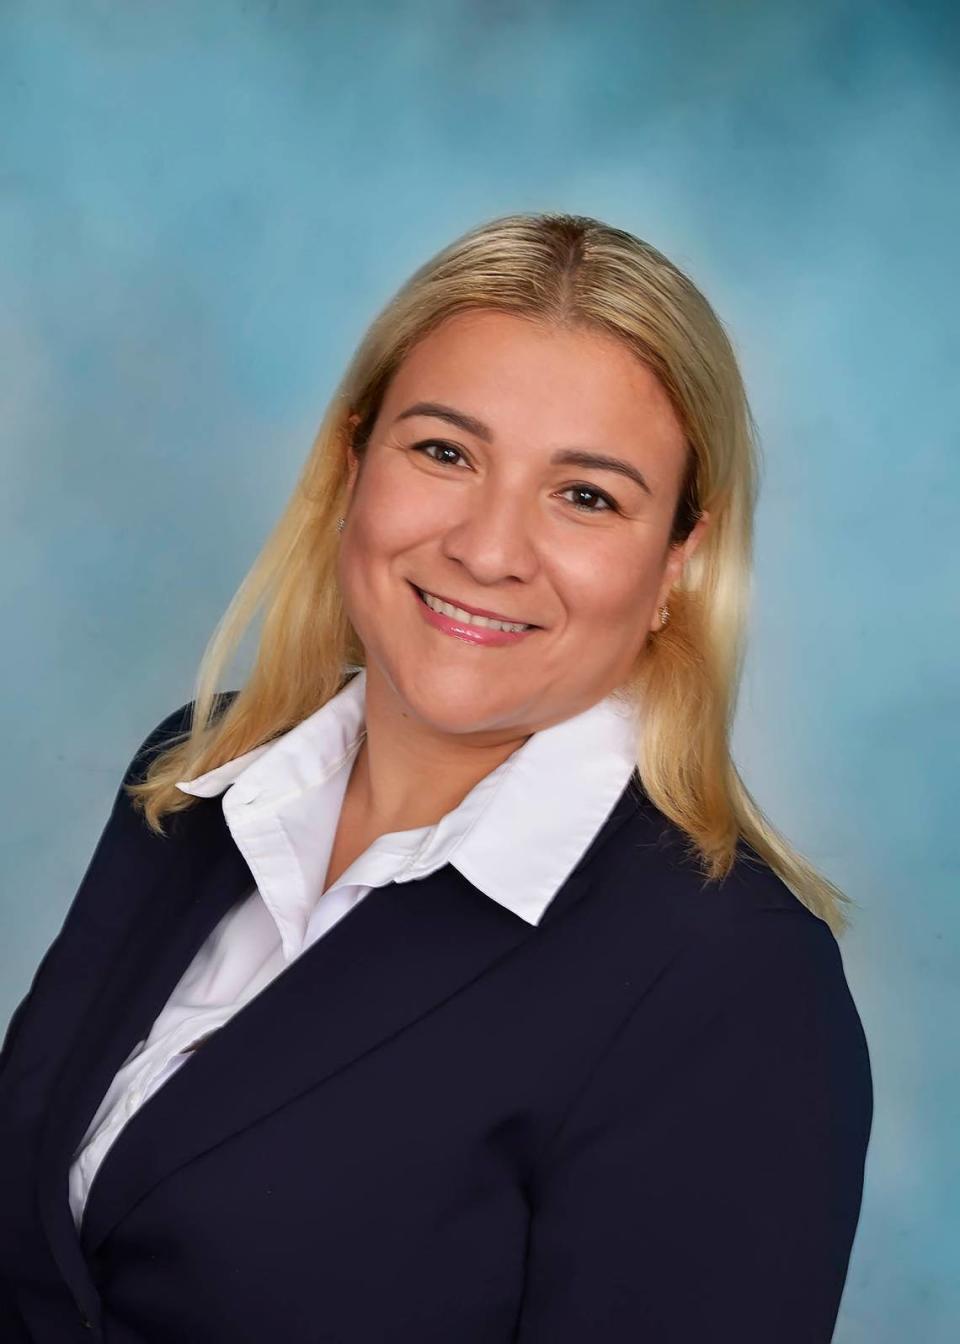 Claudia Rainville is a candidate for the District 11 seat on the Miami-Dade County Commission.